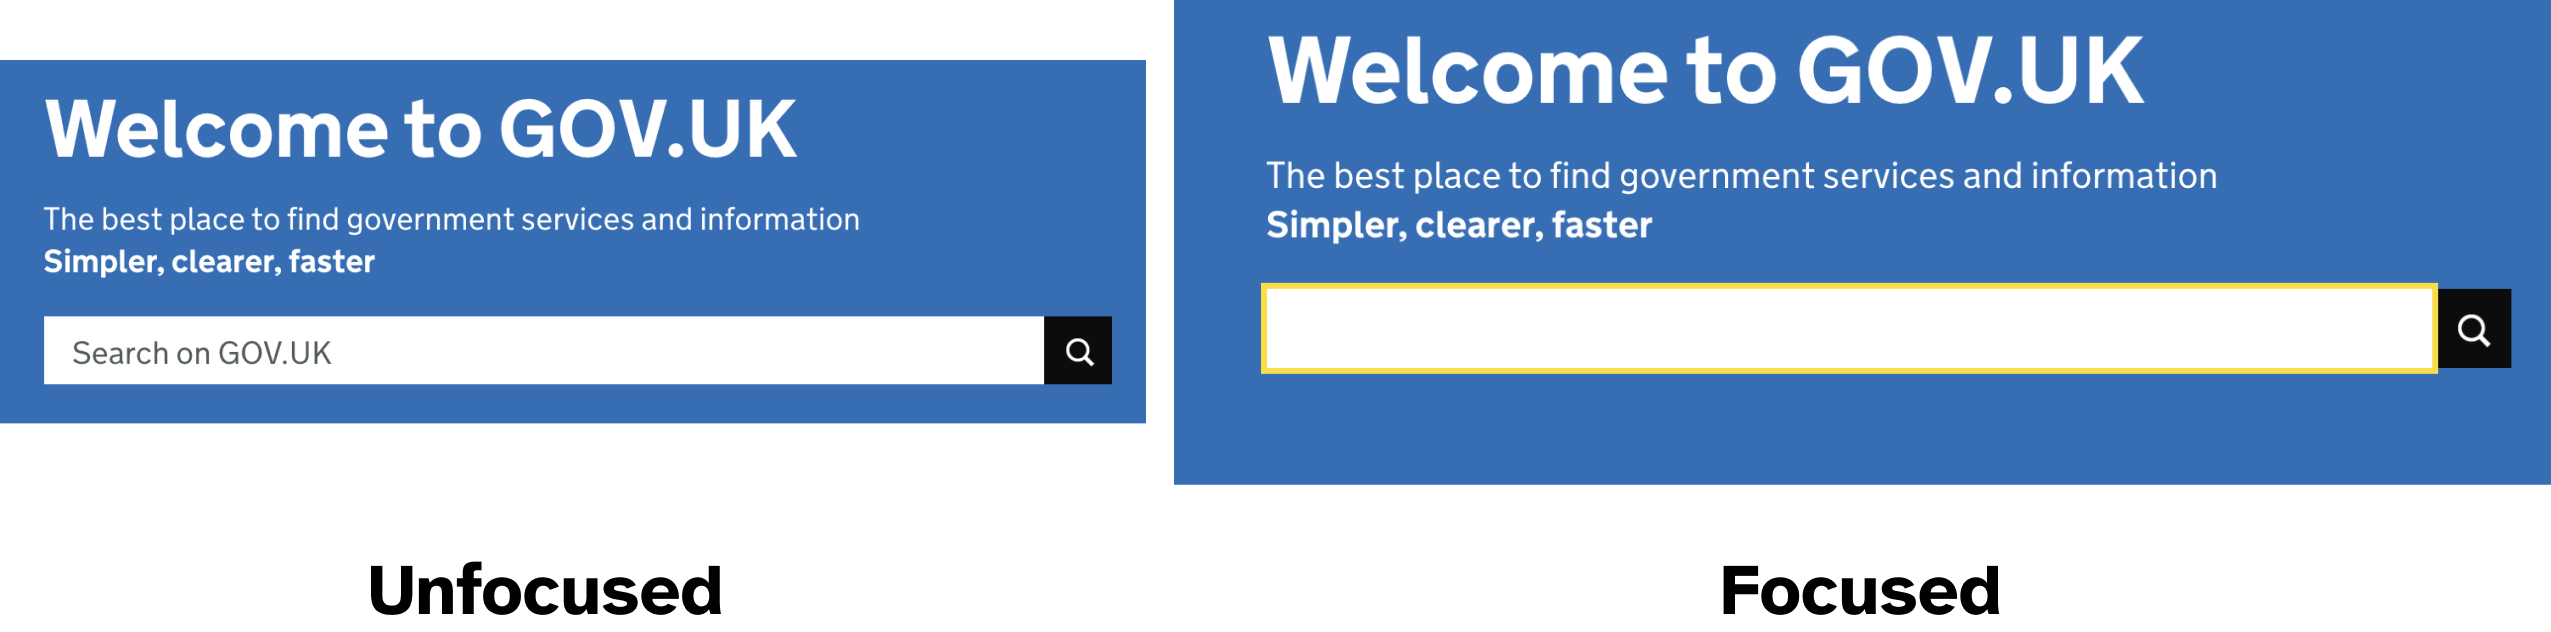 On the left: screenshot of a text input as seen on the GOV.UK homepage. The background behind the content is a shade of blue. The text input has a white background and no border. On the right, the text input in its focused state. The focus indicator is a 3px thick yellow outline around the input.